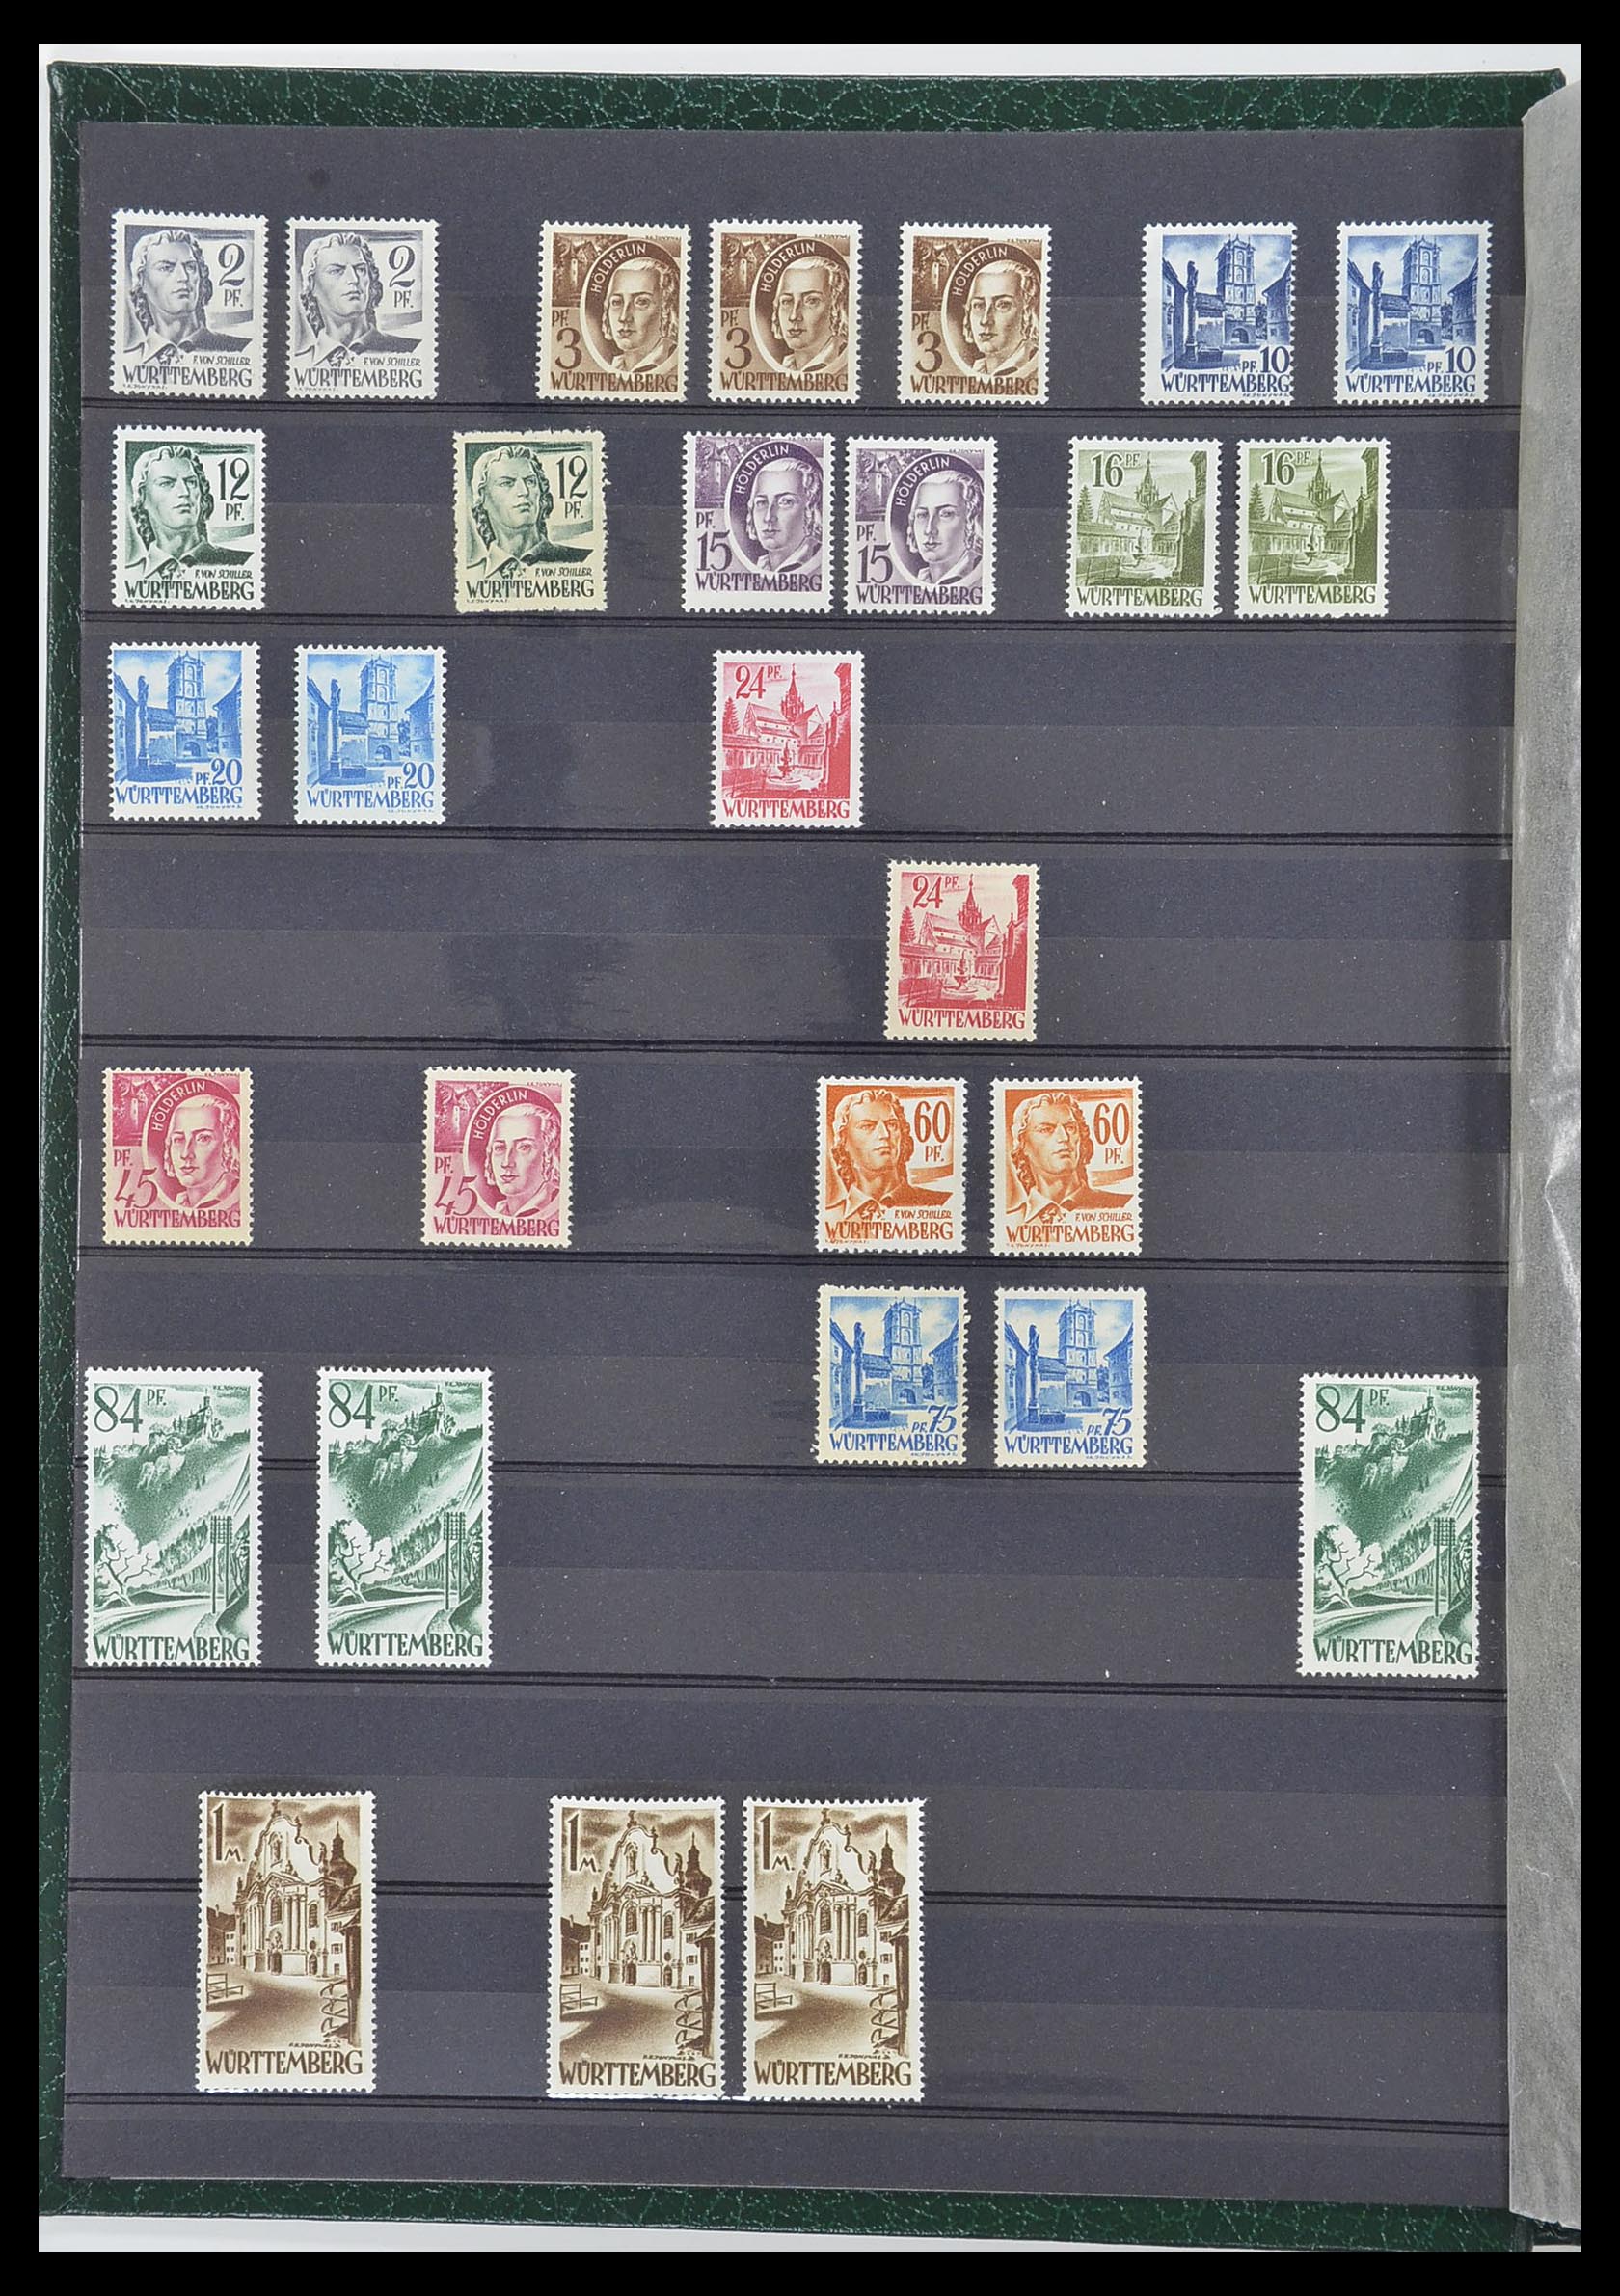 33553 080 - Stamp collection 33553 German territories and occupations 1939-1948.